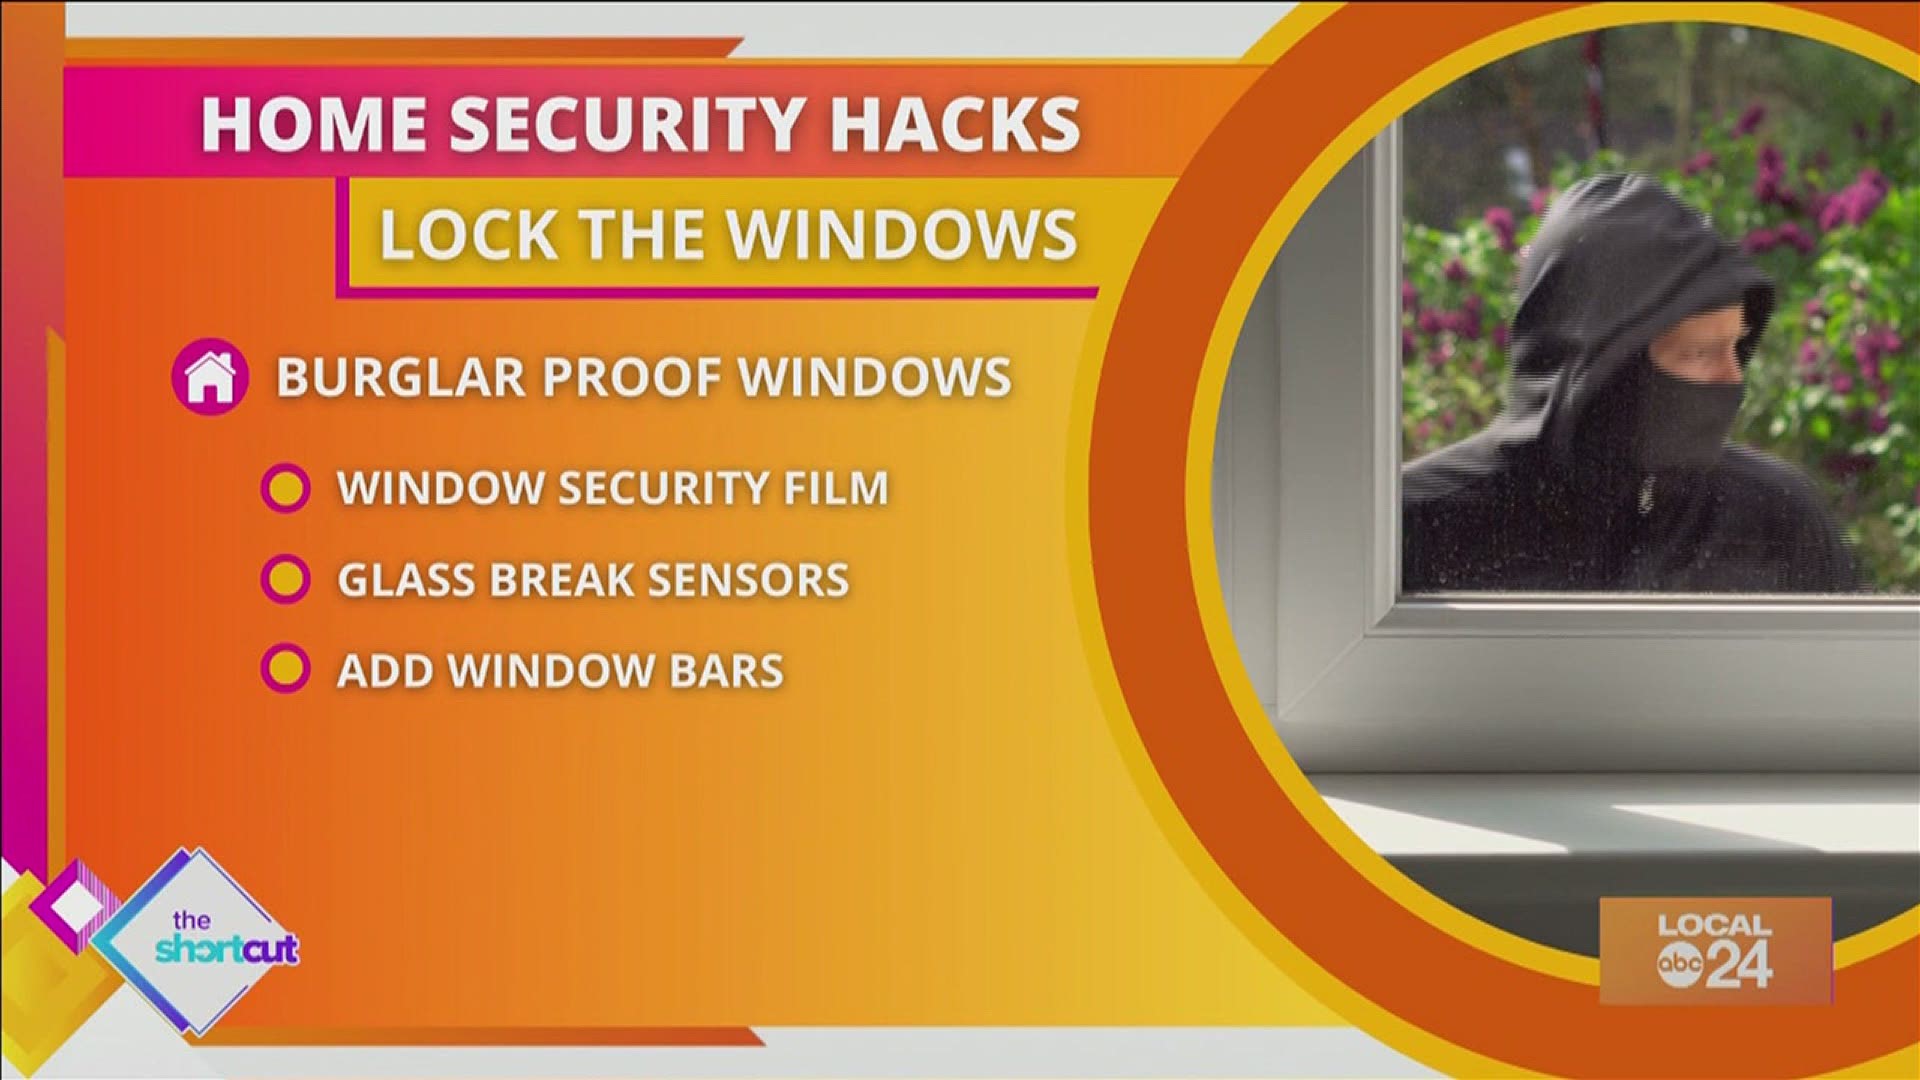 Don't let your home fall victim to burglary! Try out these four proven, modern home security hacks! You'll thank us later! Only on "The Shortcut!